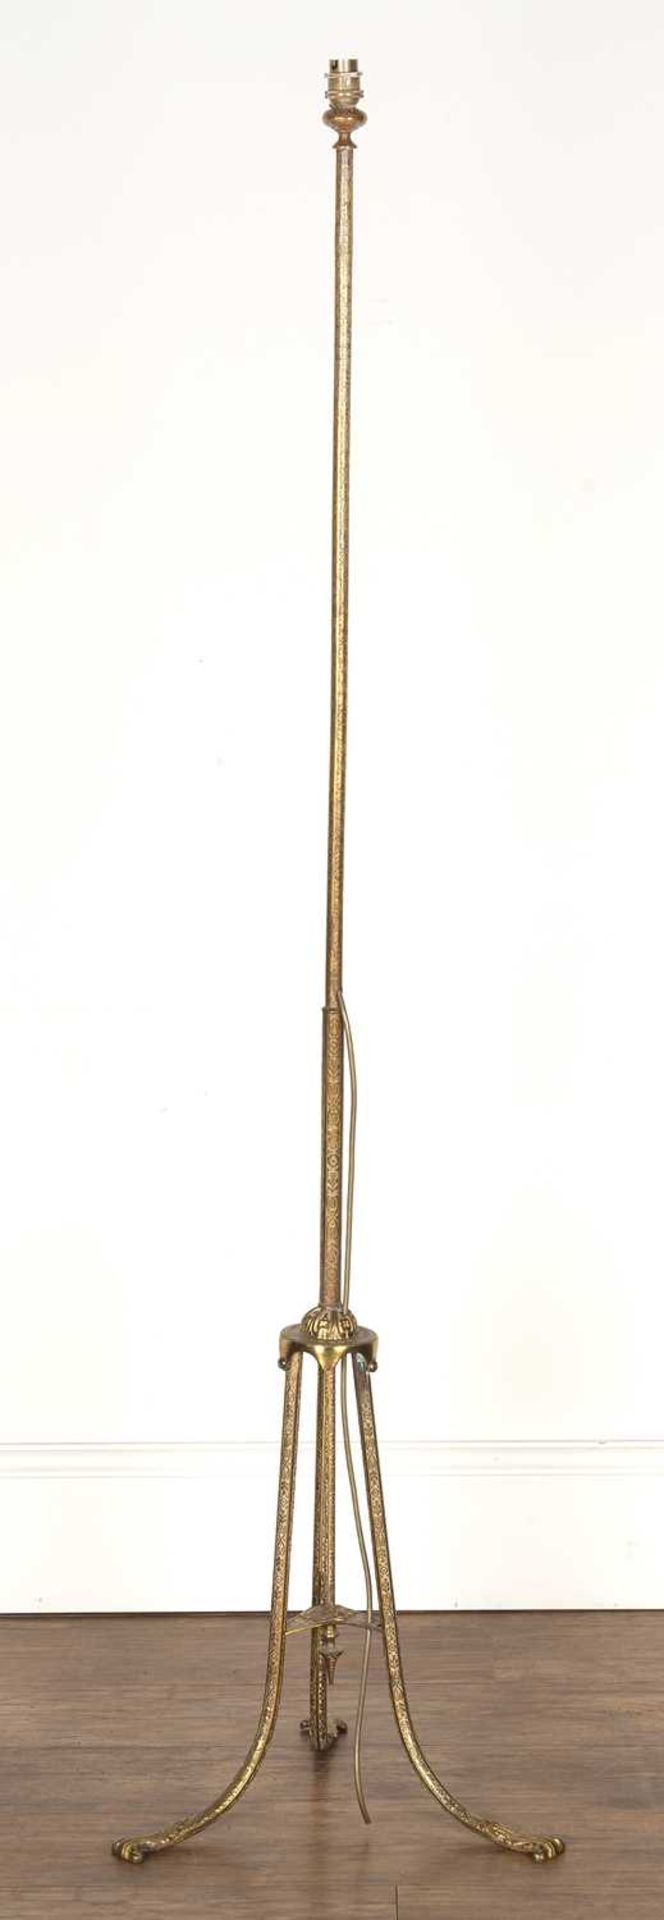 Brass standard lamp 20th Century, with repeating scrolling motifs, standing on a tripod base, - Image 2 of 4